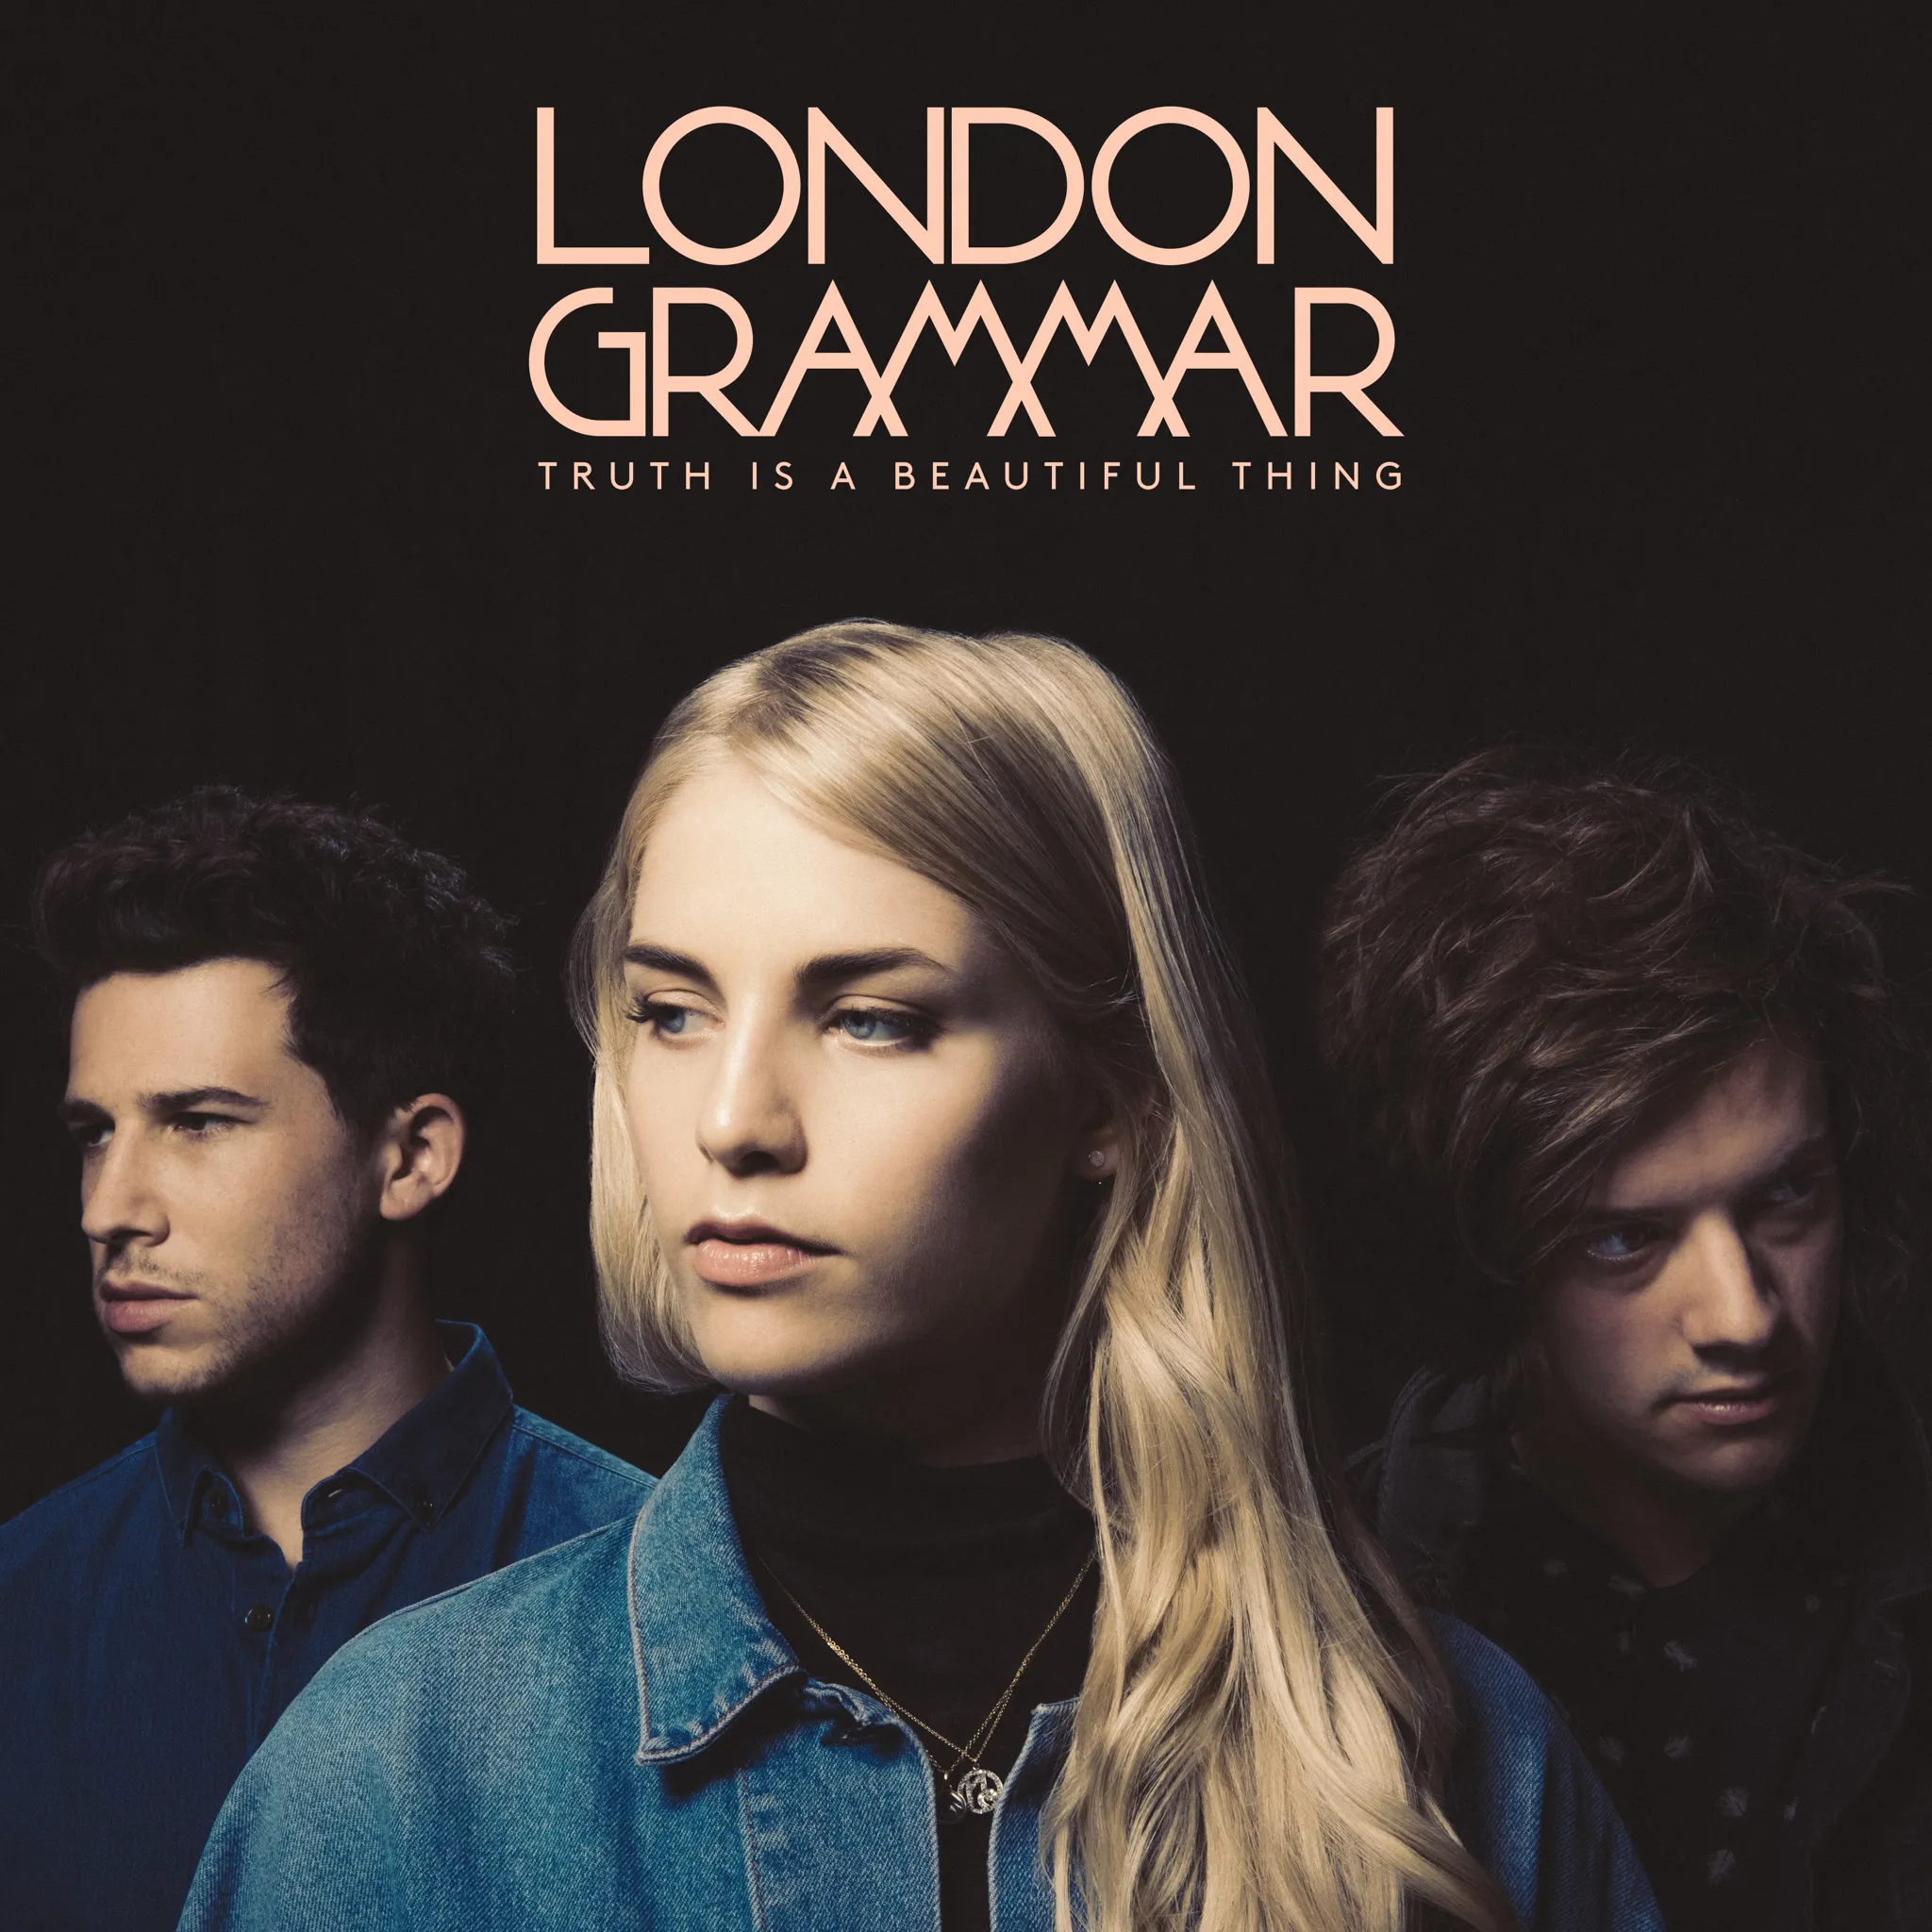 <strong>London Grammar - Truth Is A Beautiful Thing</strong> (Vinyl LP - black)